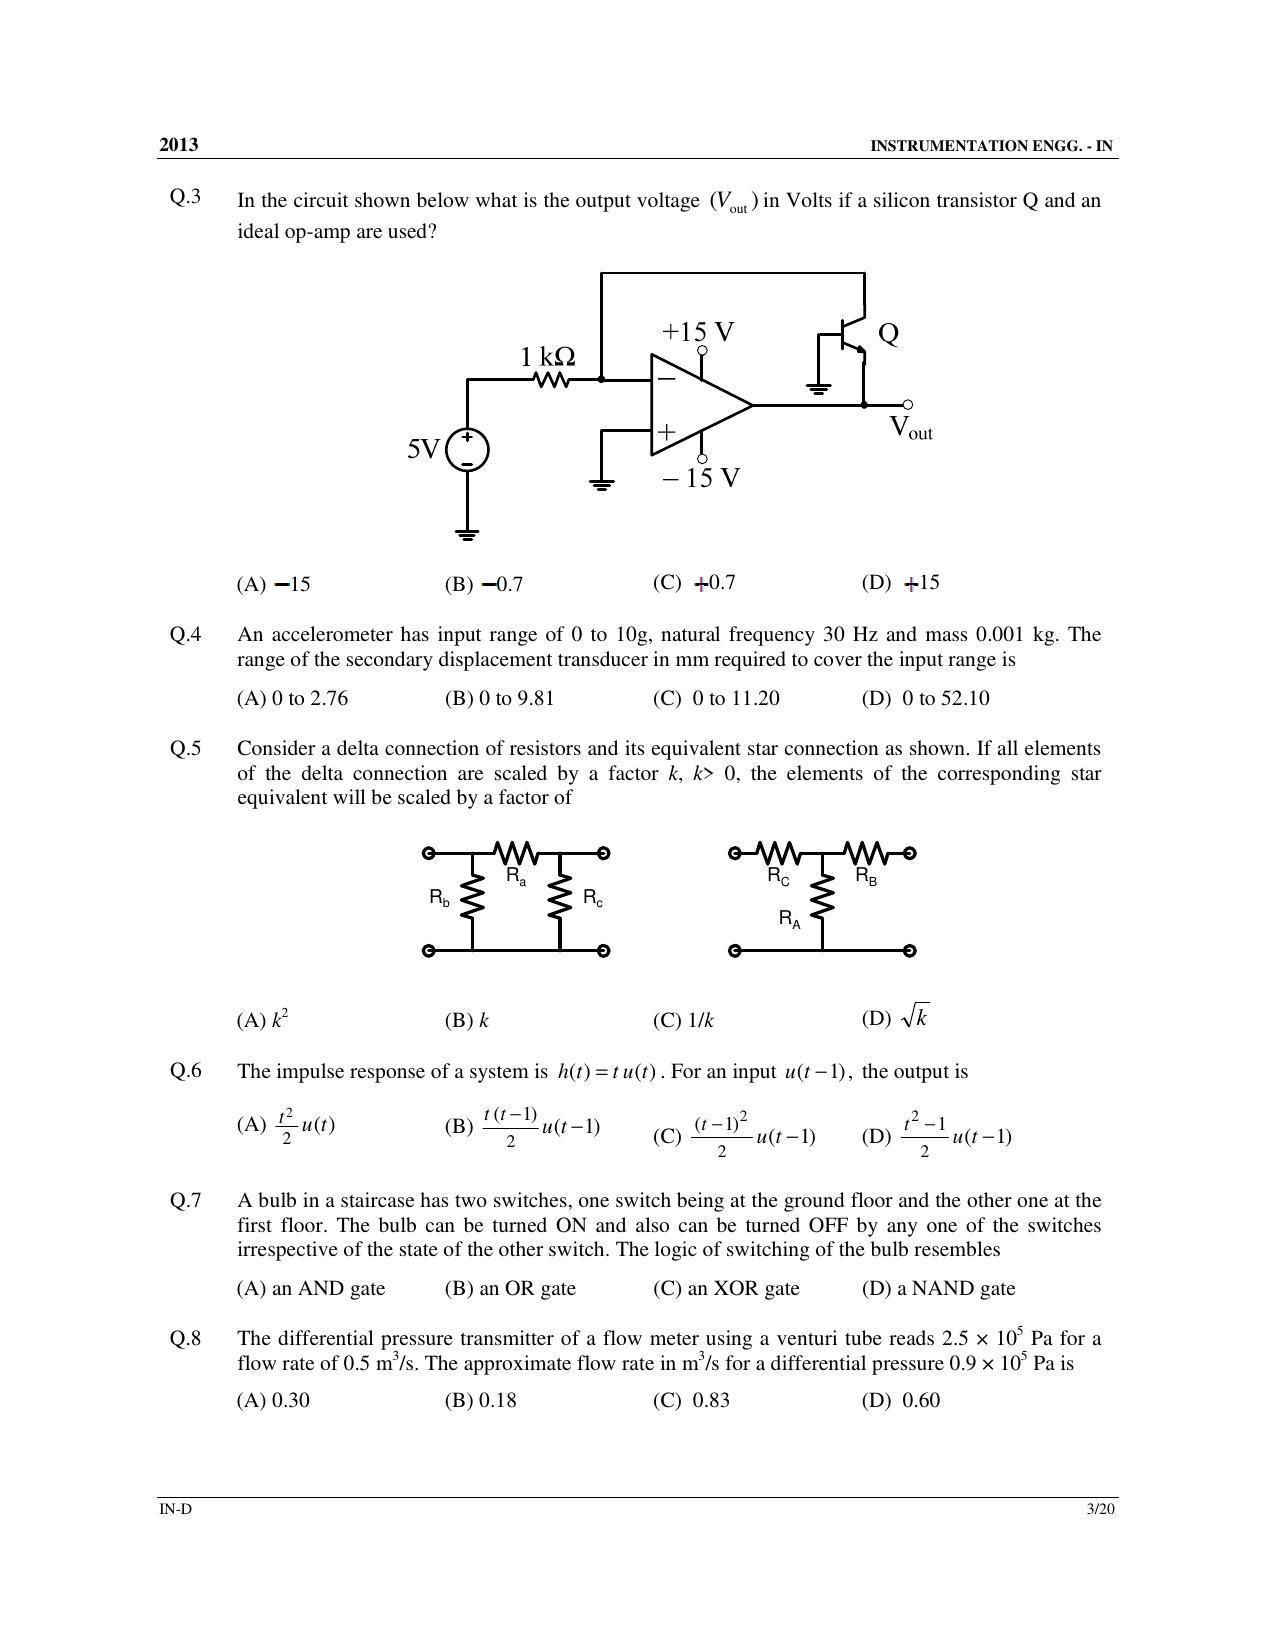 GATE 2013 Instrumentation Engineering (IN) Question Paper with Answer Key - Page 55